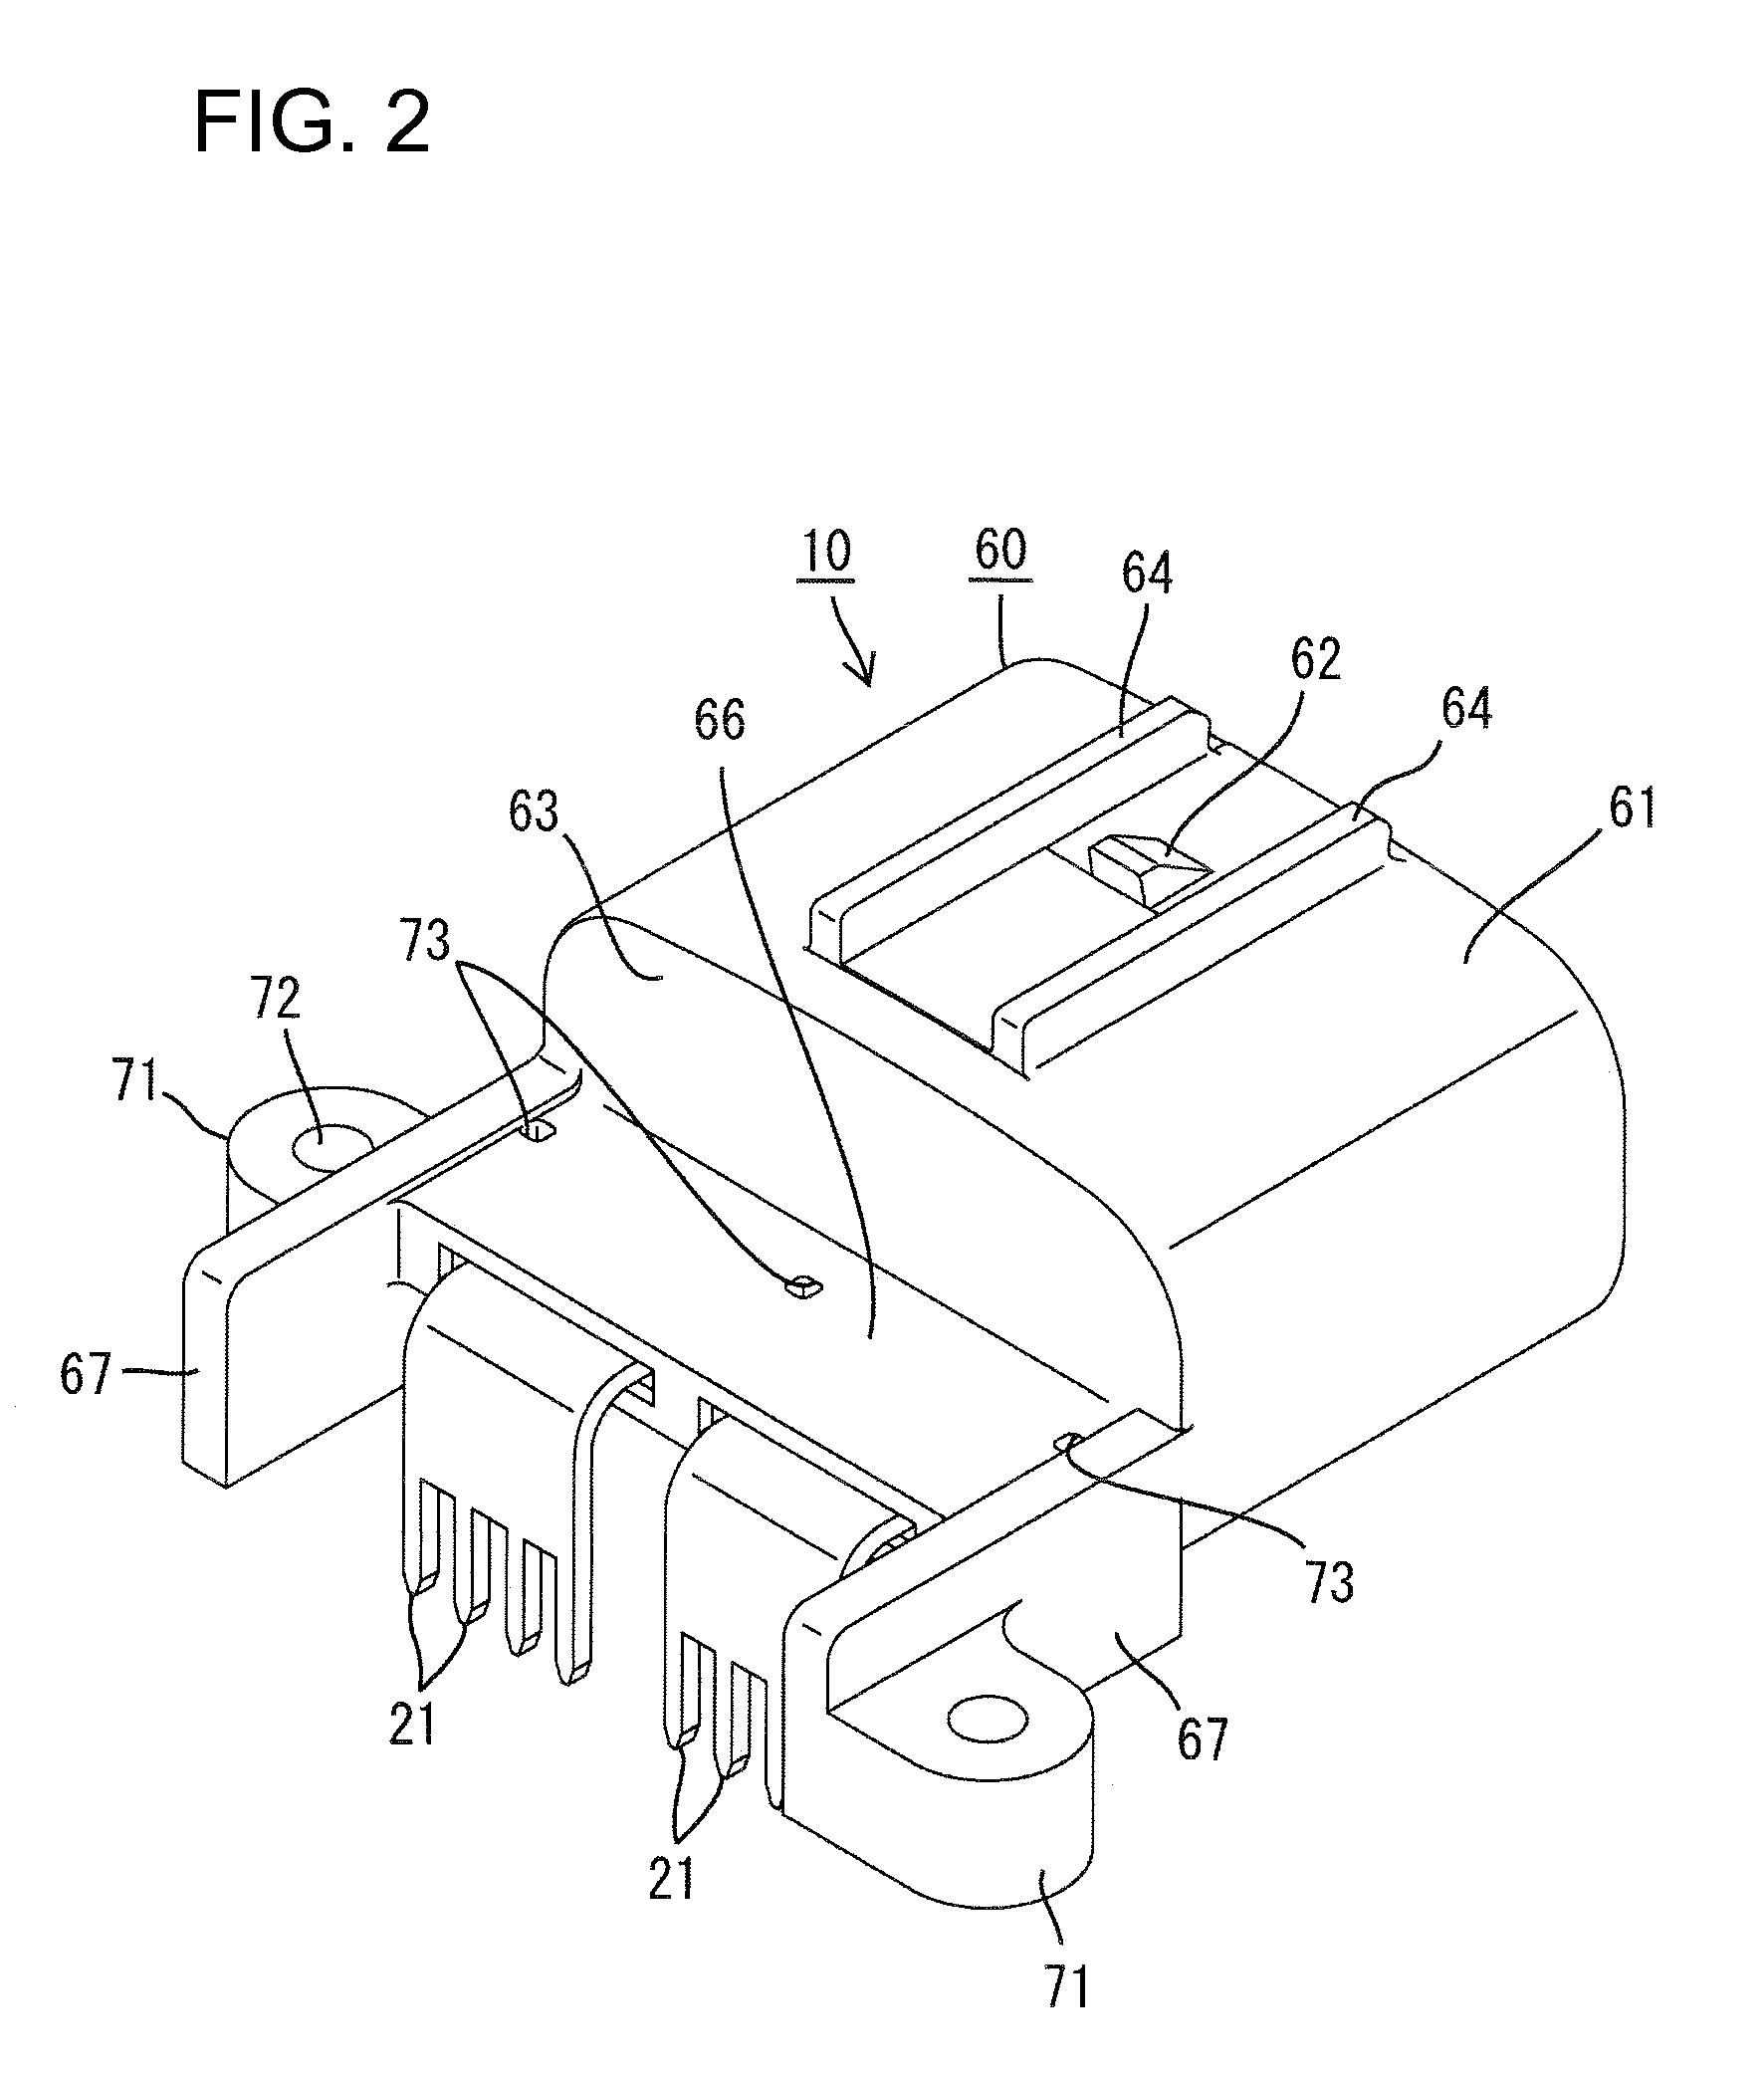 Connector for use in substrate